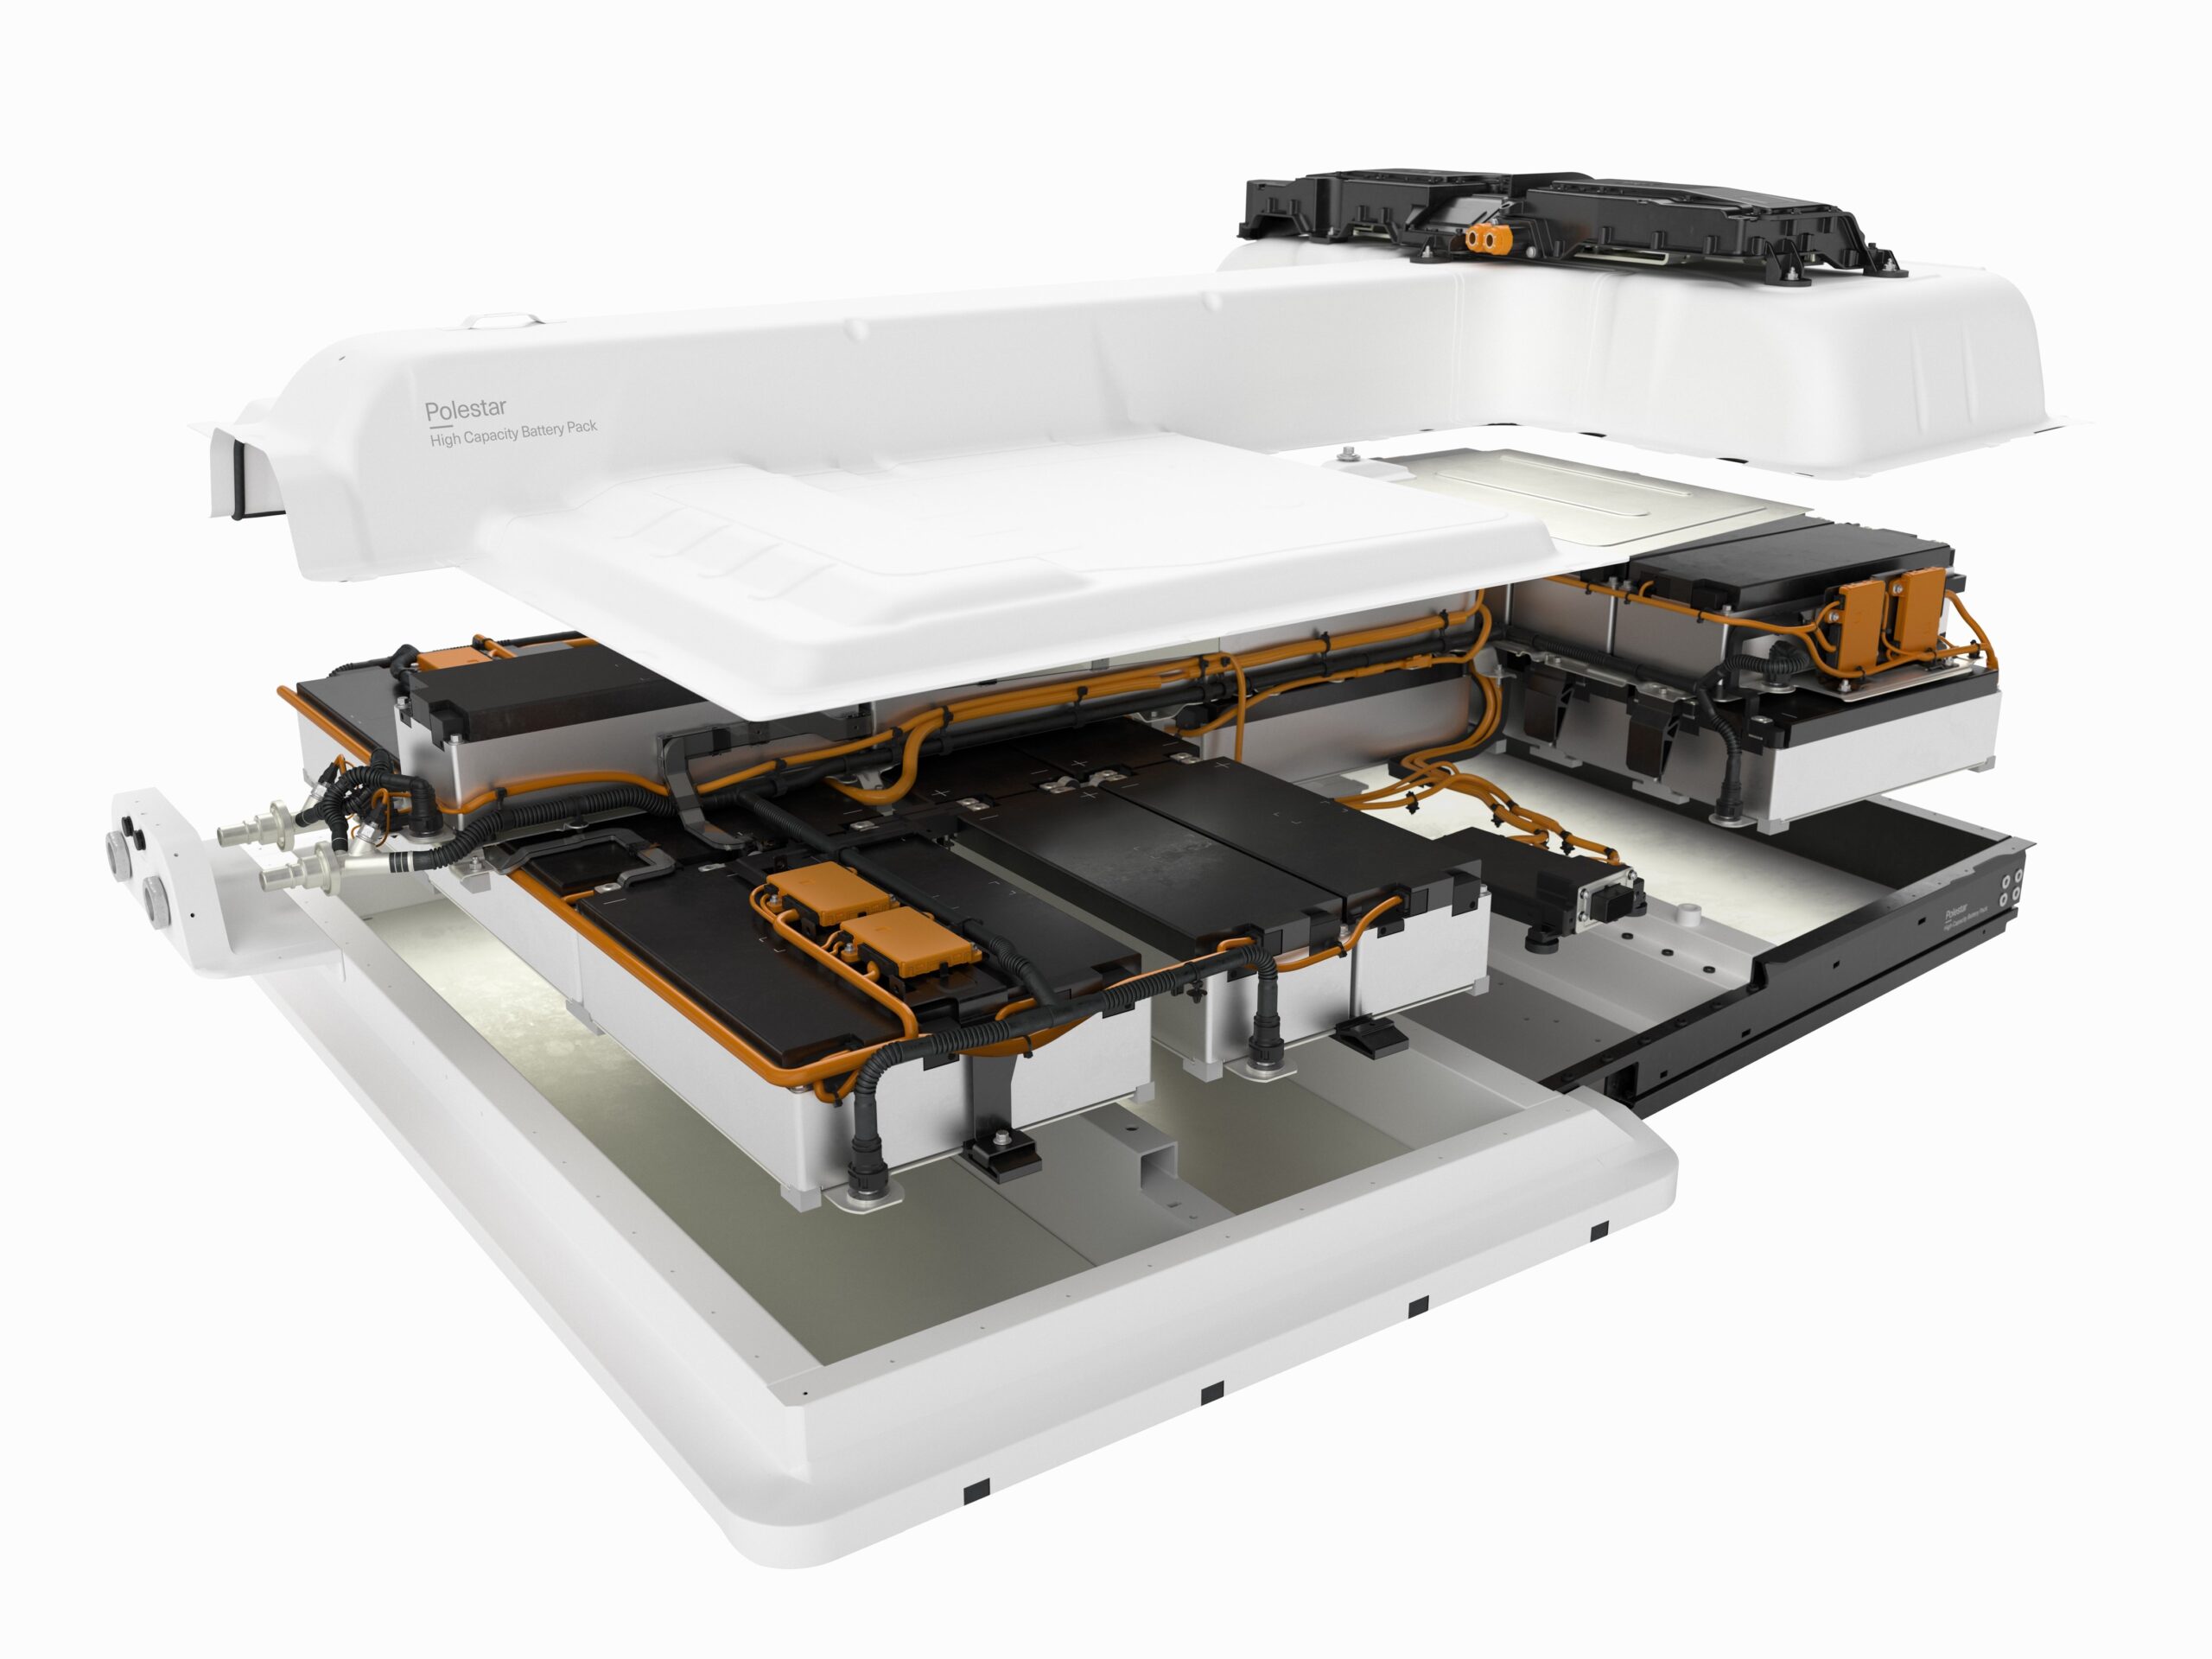 Polestar to supply batteries to electric hydrofoil boat company Candela -  Just Auto